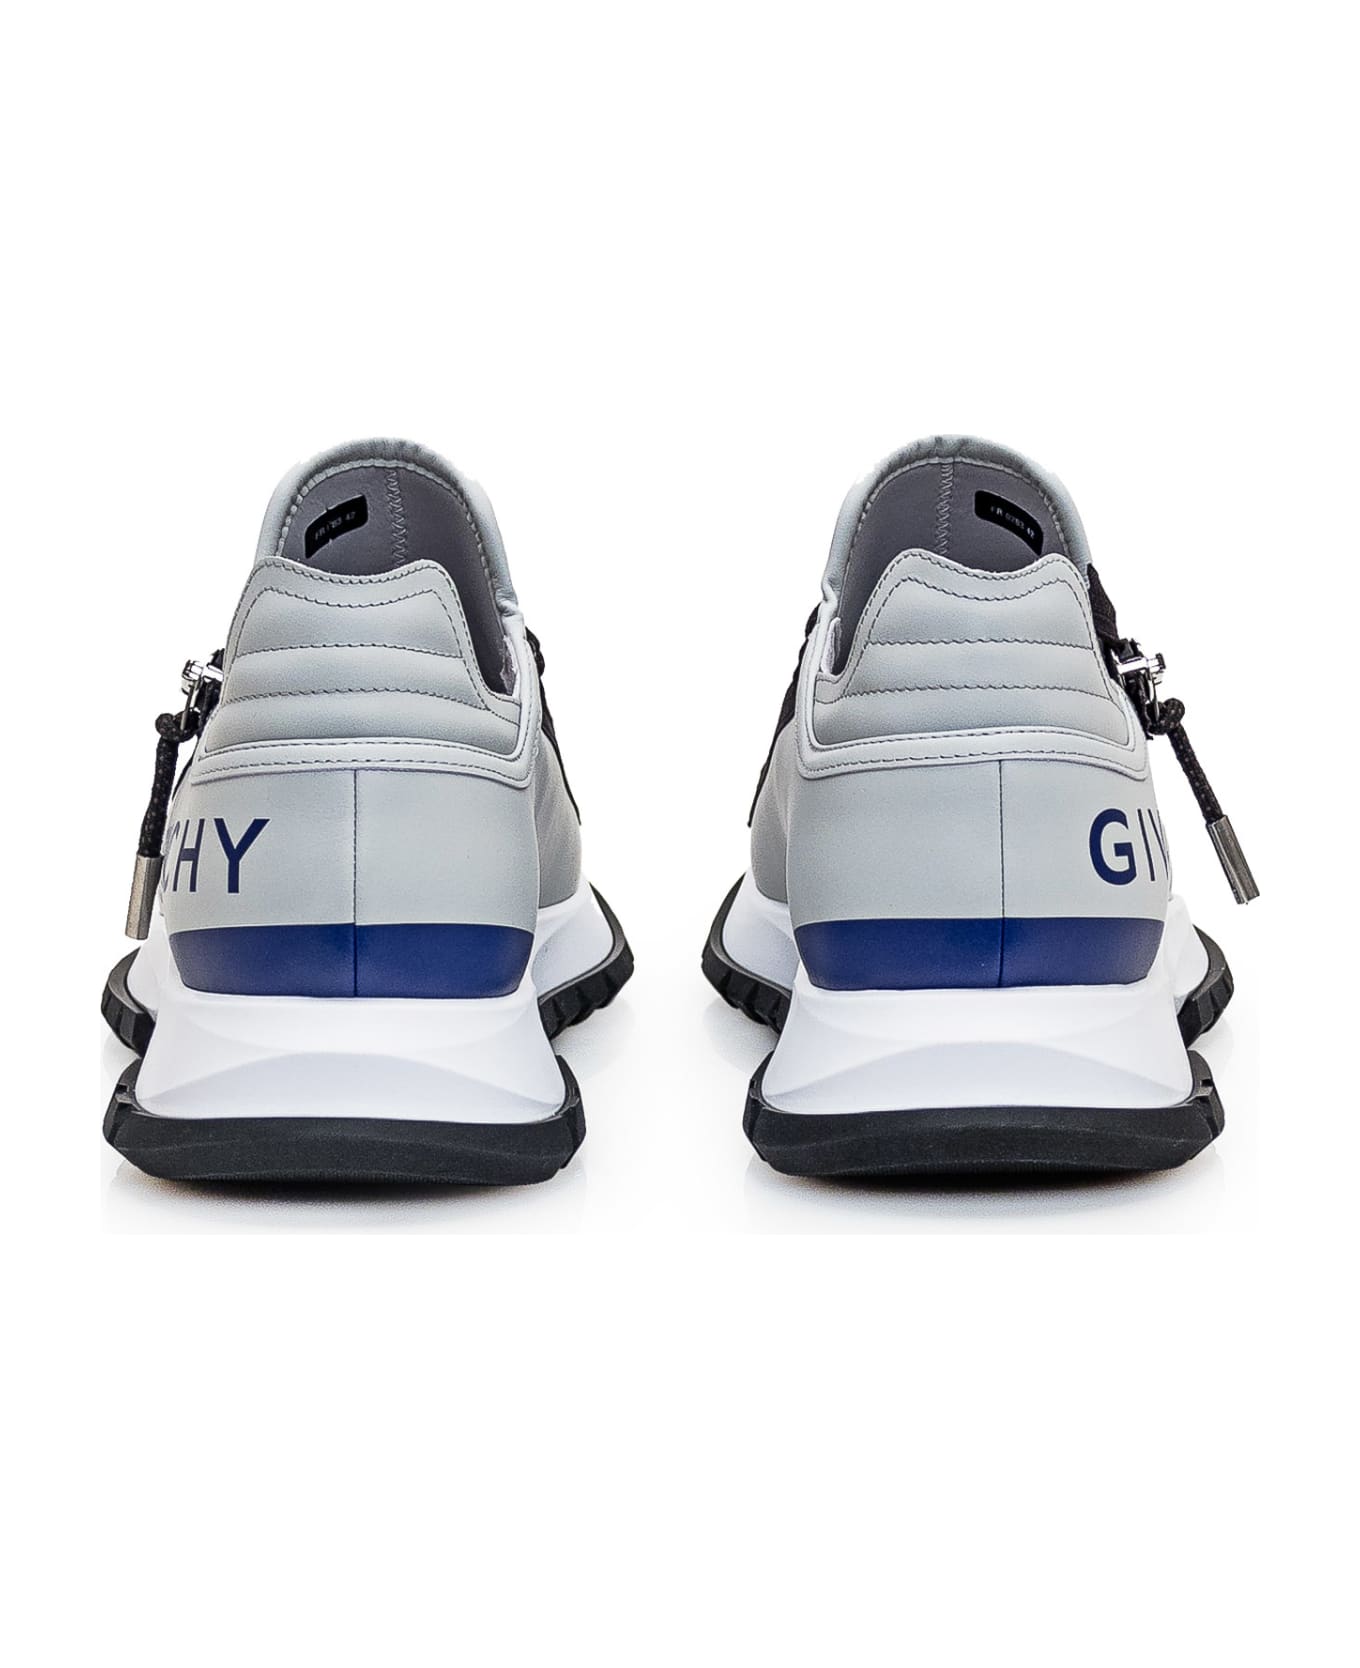 Givenchy Spectre Running Sneaker - GREY BLUE